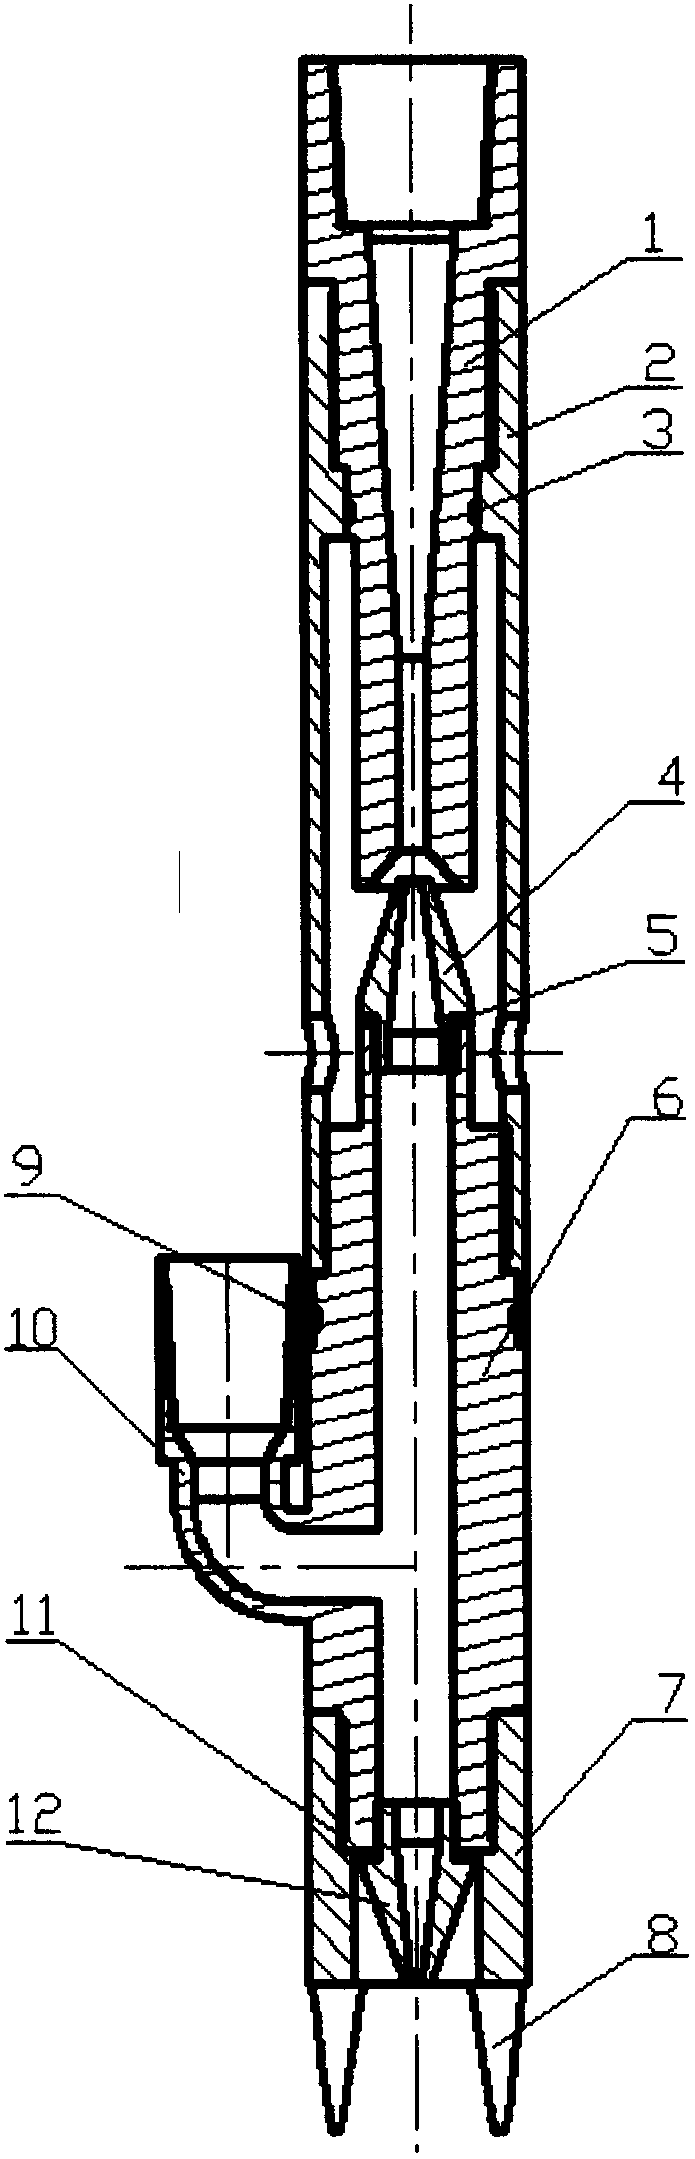 Downhole device using hydraulic jets of parallel tubes to flush pulverized coal